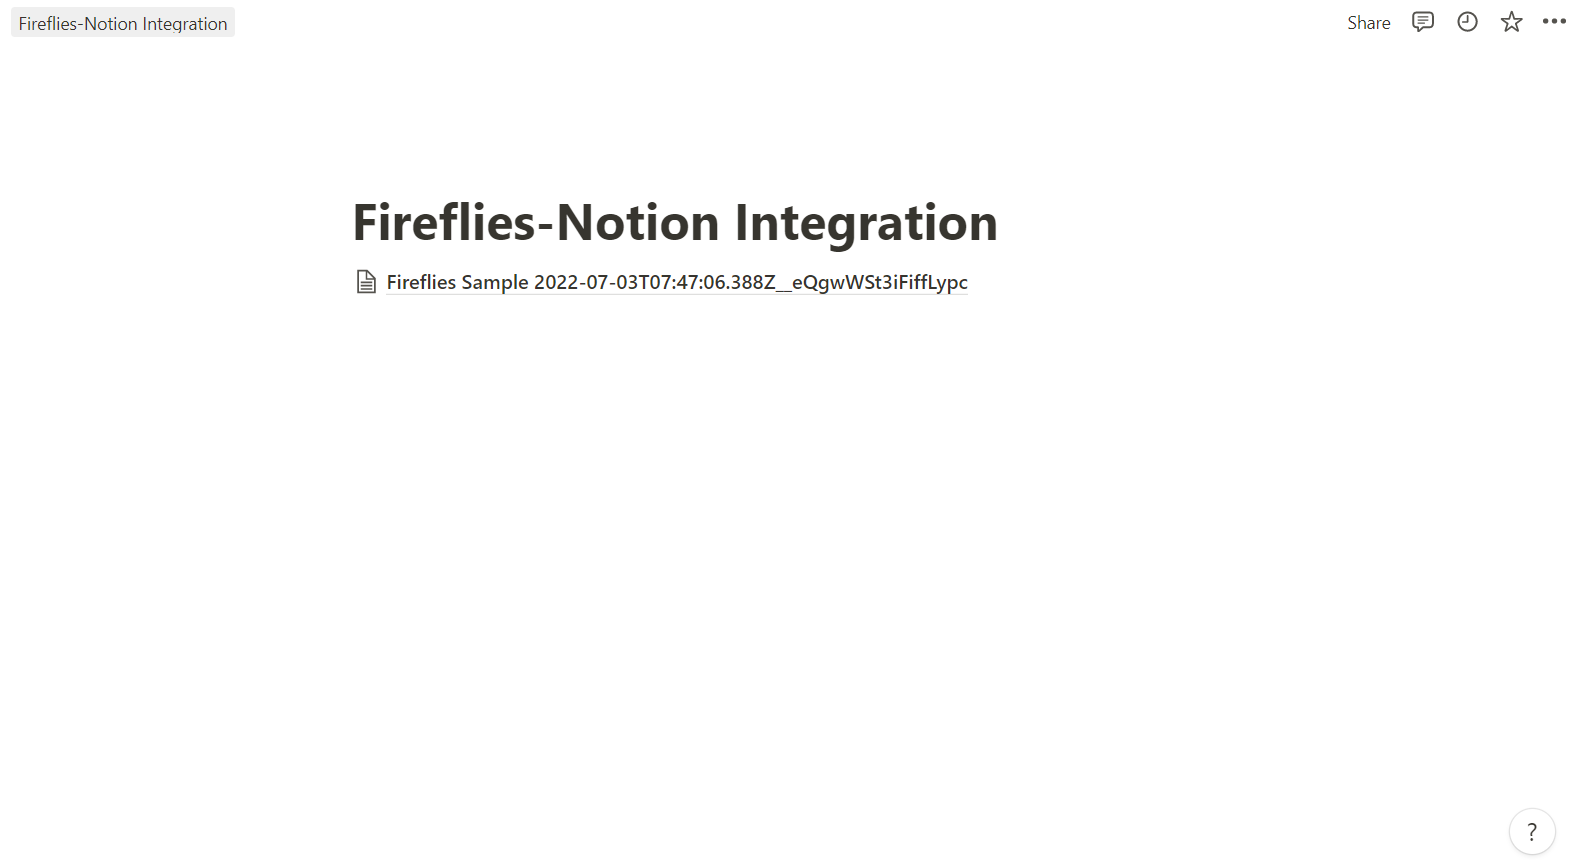 Sample file inserted in Notion